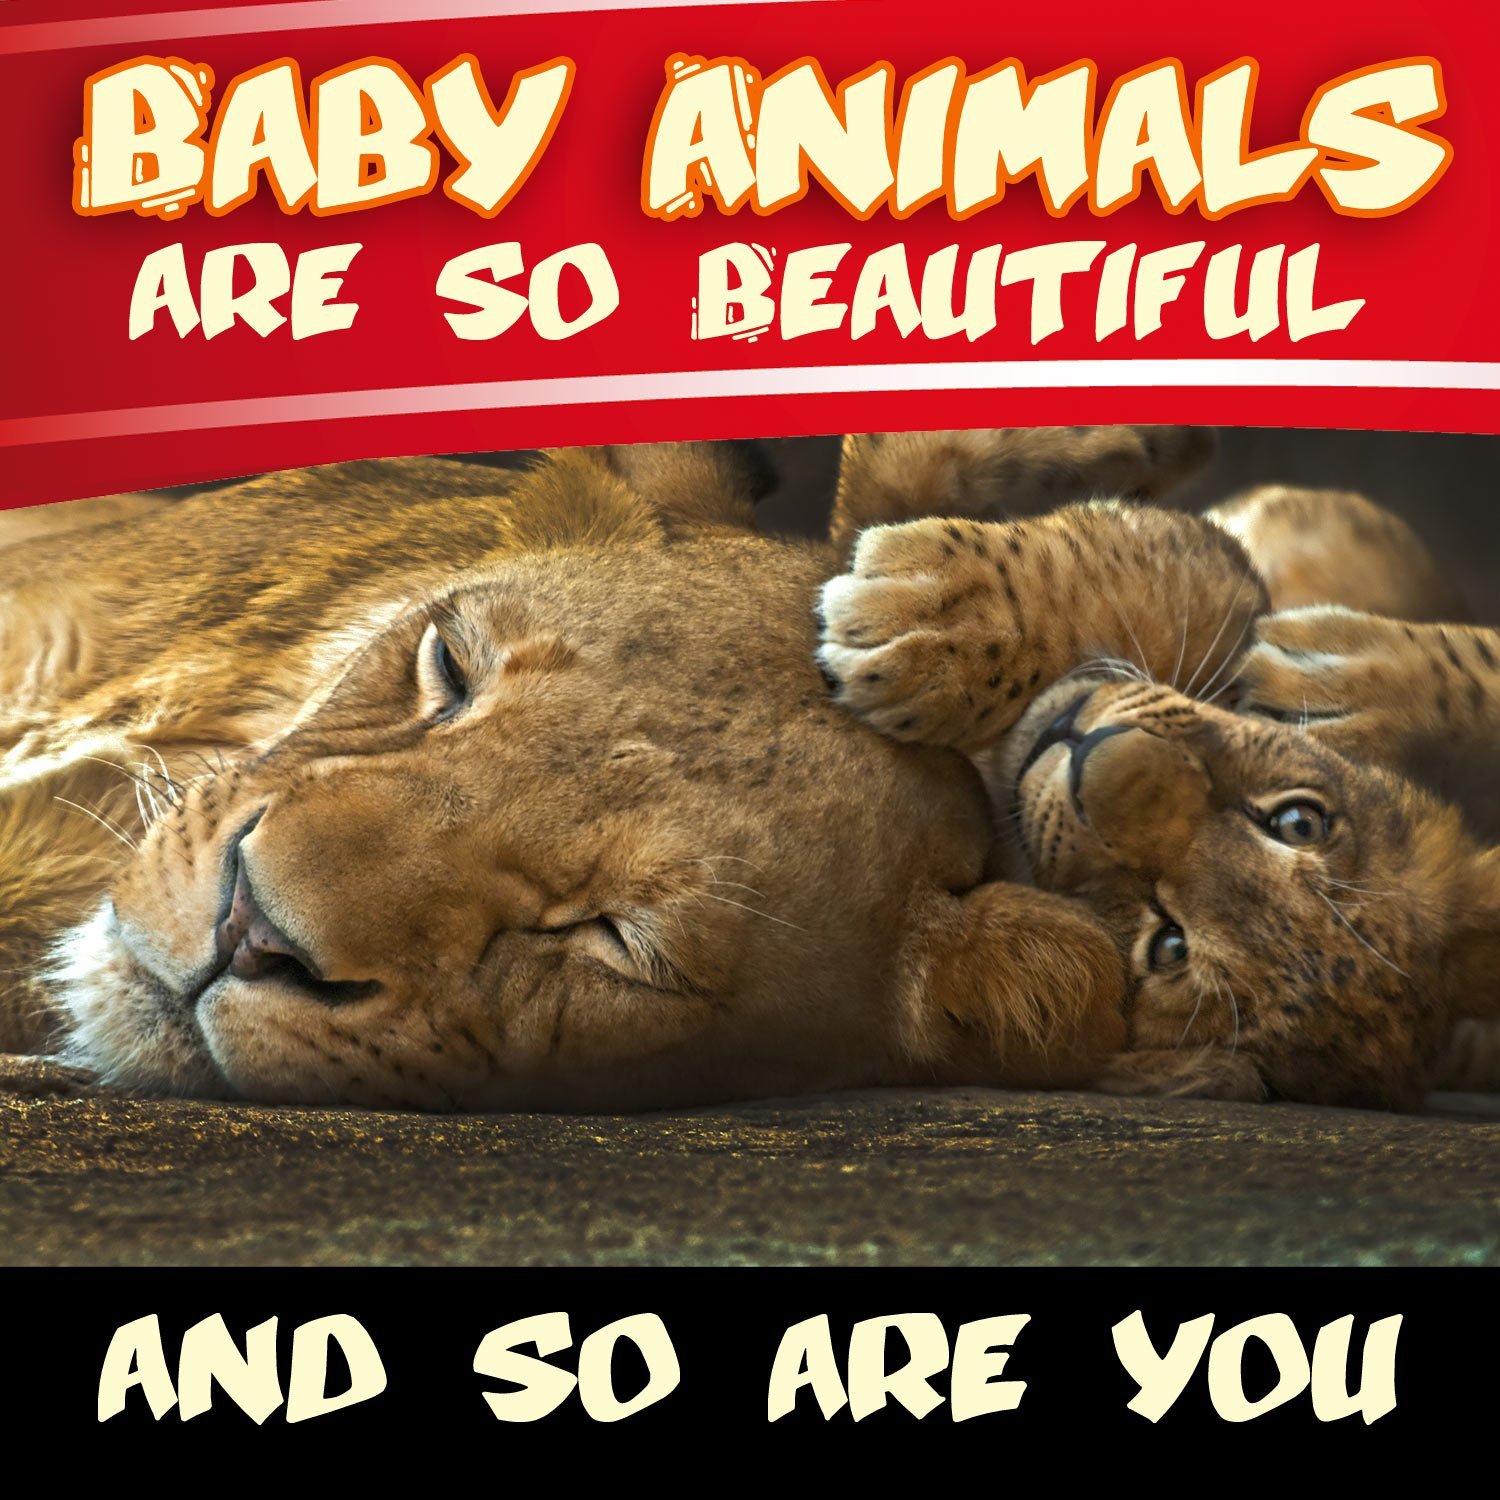 Baby Animals Are So Beautiful – And So Are You by David Martin